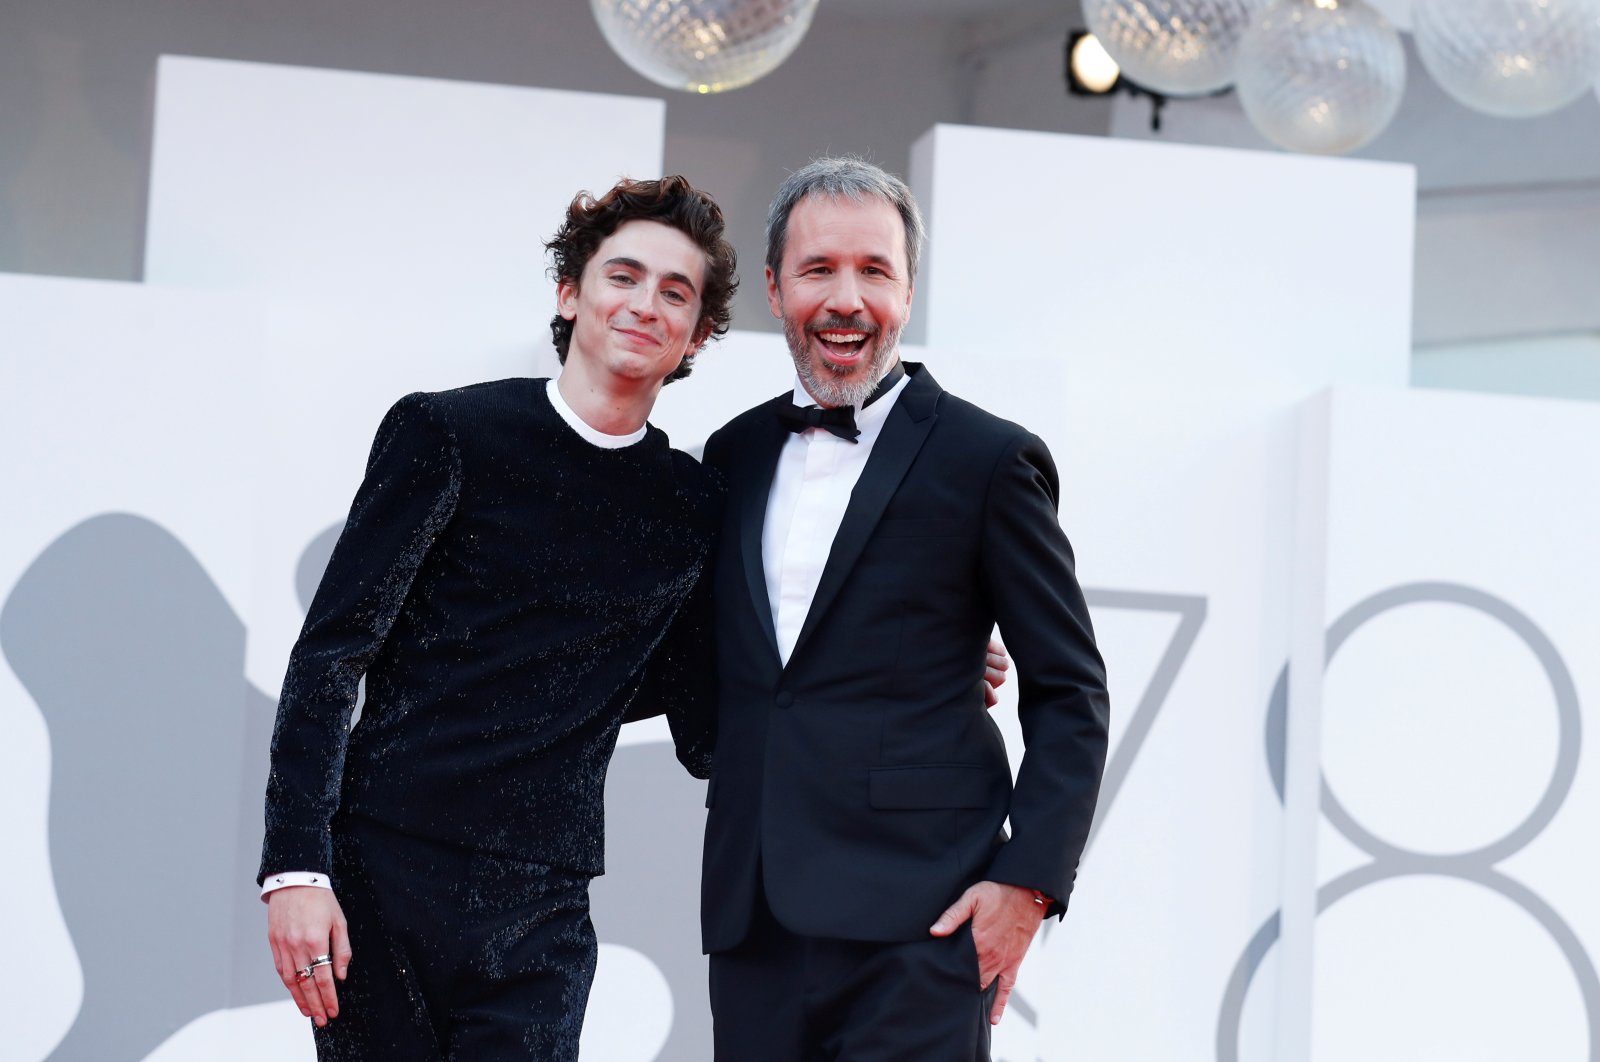 Actor Timothee Chalamet (L) and director Denis Villeneuve pose before the screening of the film "Dune," at the 78th Venice Film Festival, in Venice, Italy, Sept. 3, 2021. (Reuters Photo)